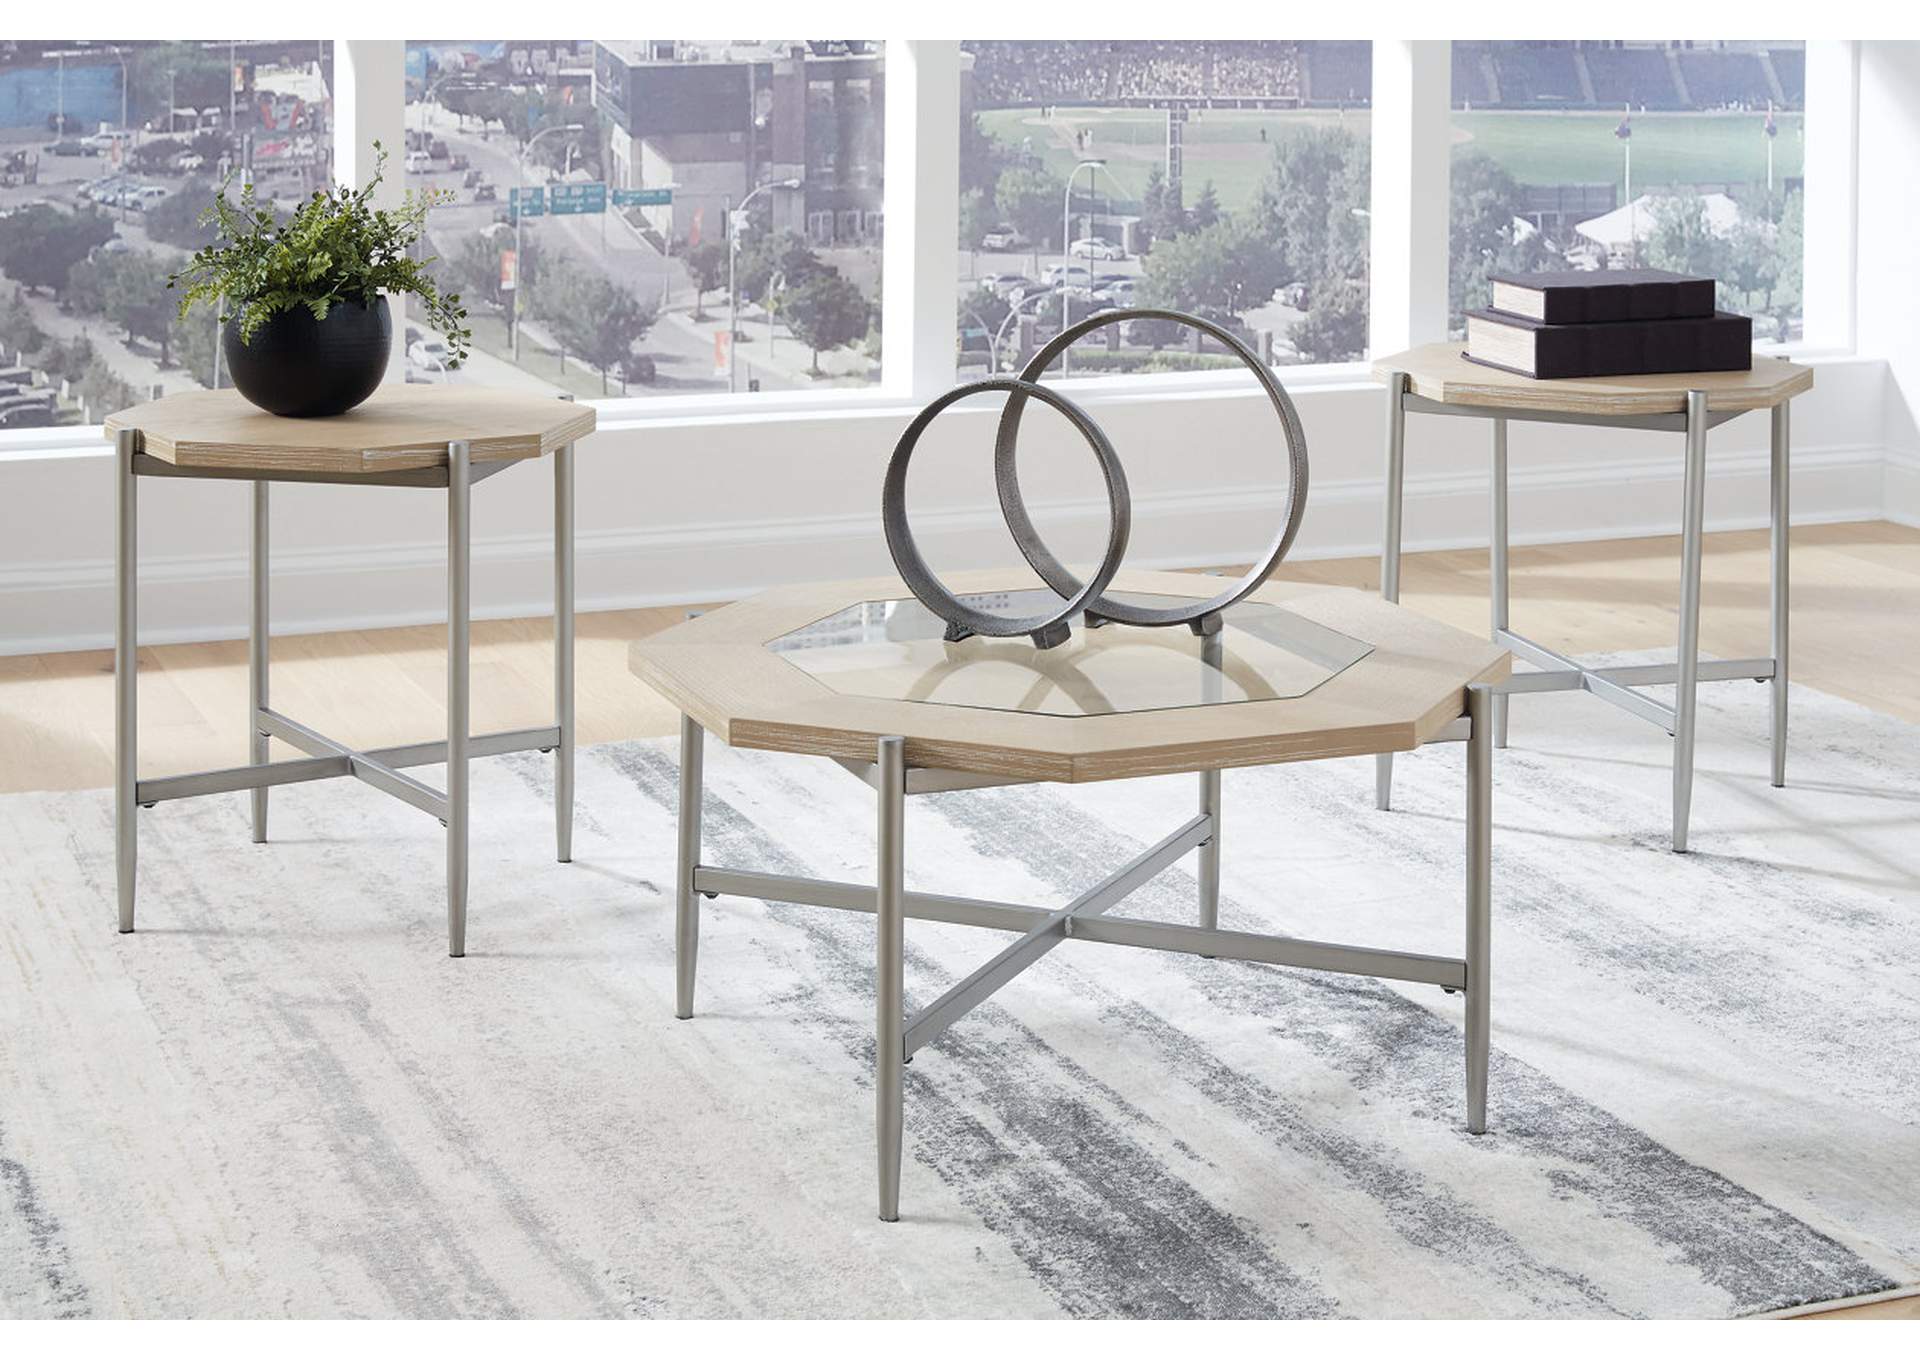 Varlowe Table (Set of 3),Signature Design By Ashley